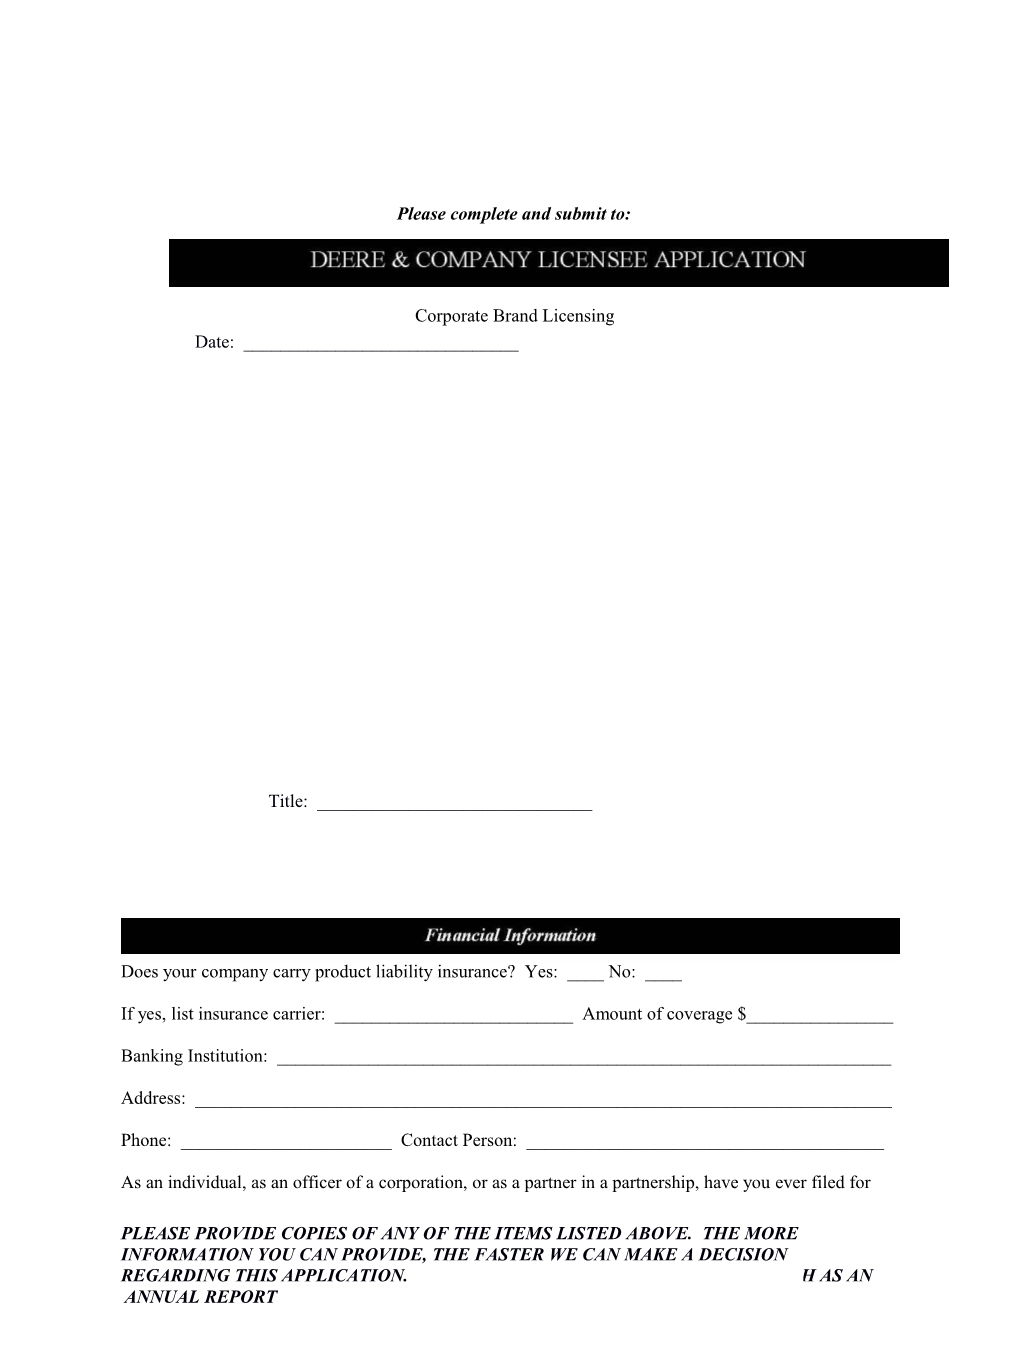 Deere & Company Licensee Application Form